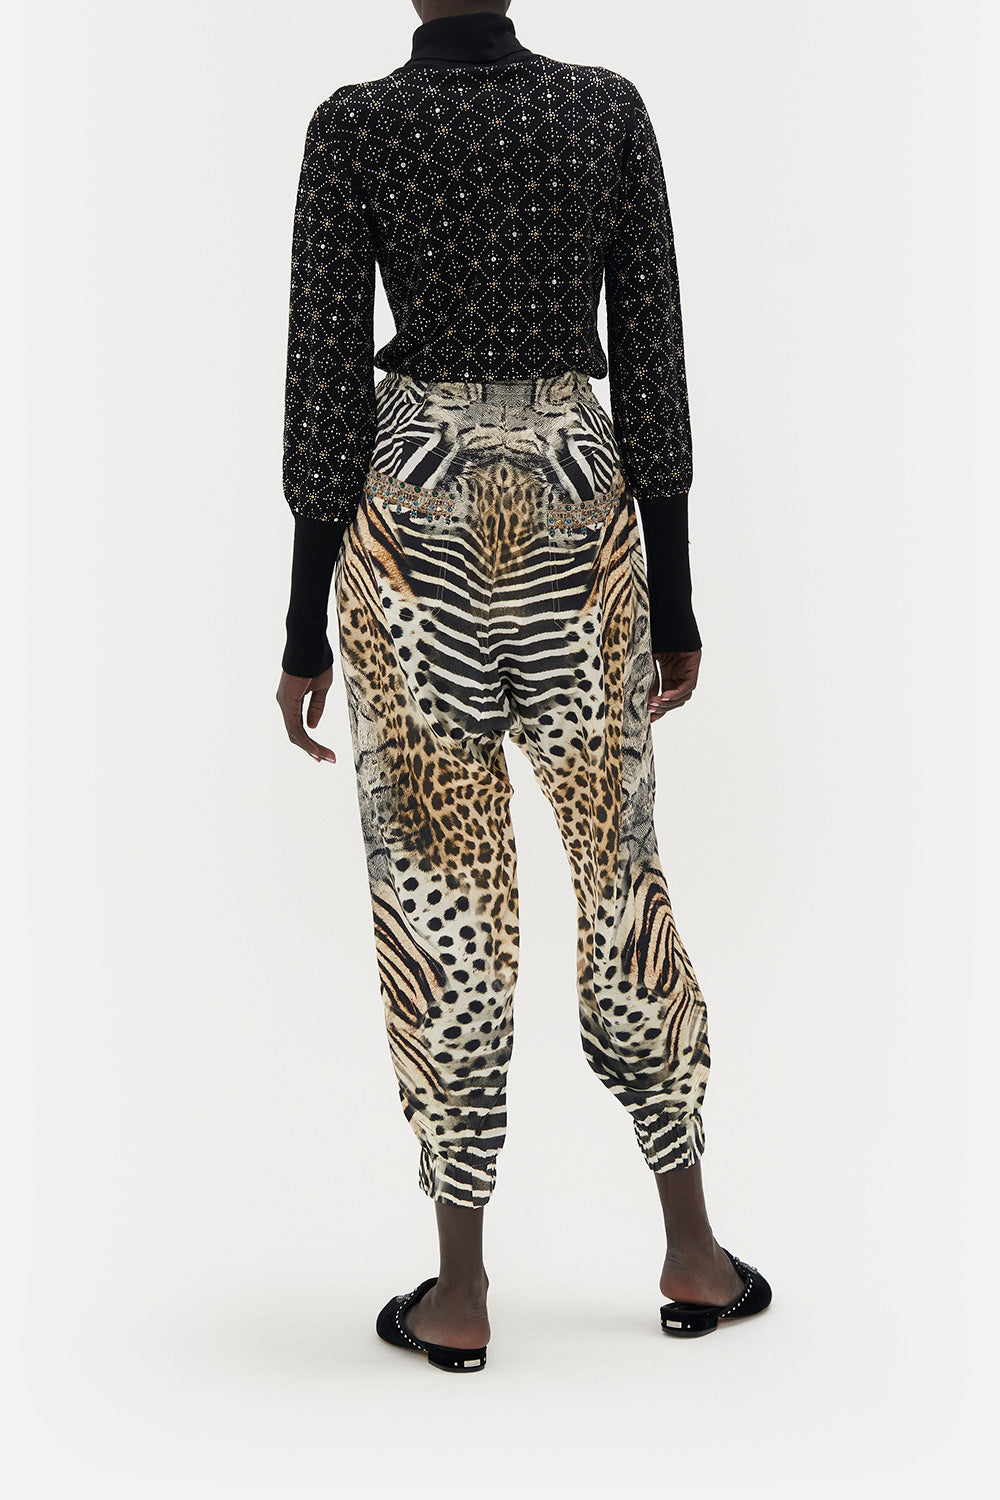 DROP CROTCH TRACK PANT FOR THE LOVE OF LEO